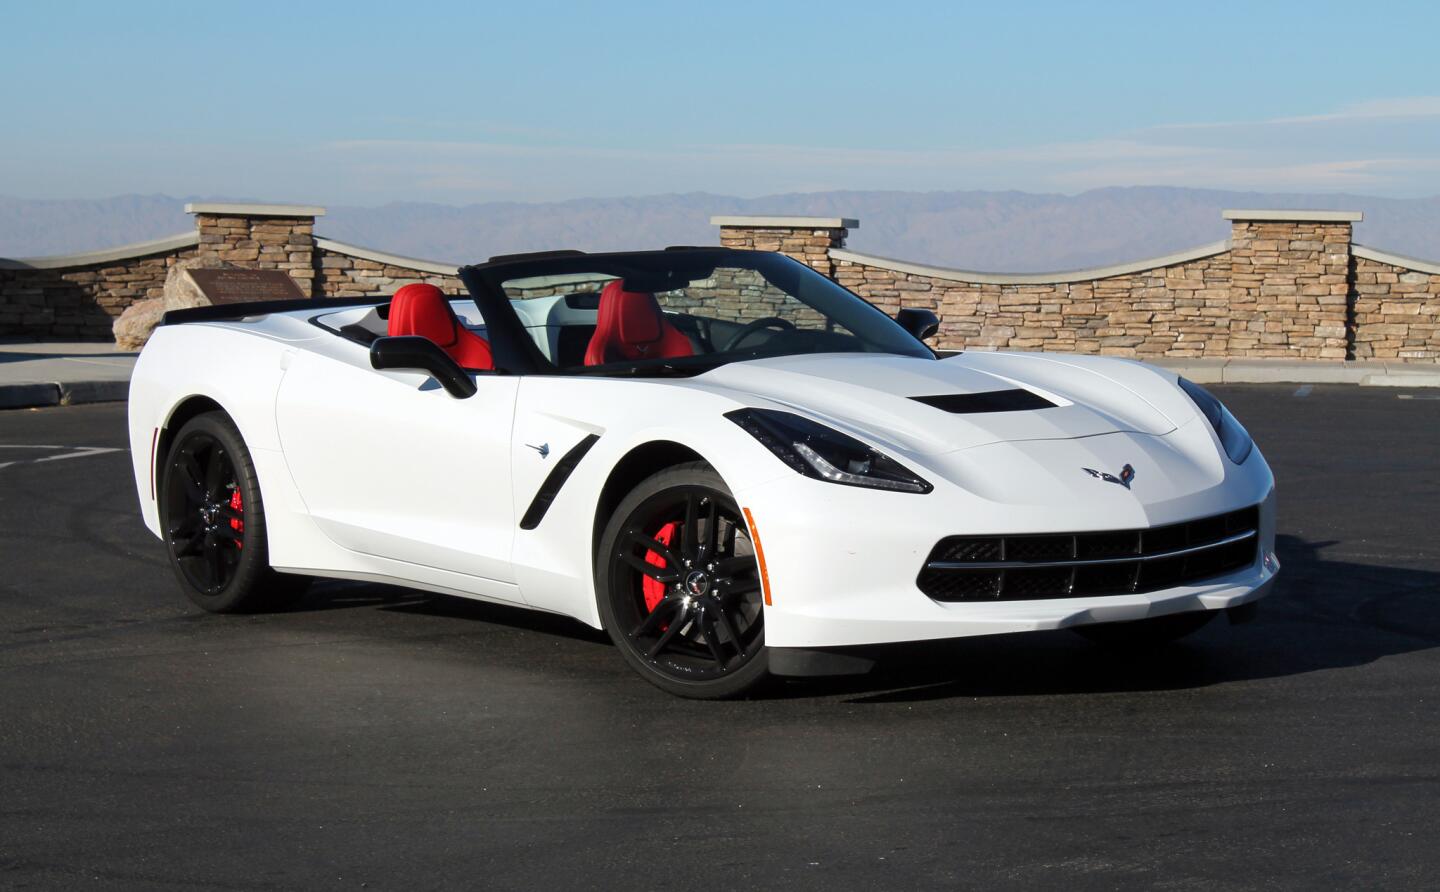 The Chevrolet Corvette Stingray starts at $50,595 and may be the best vehicle made in America.